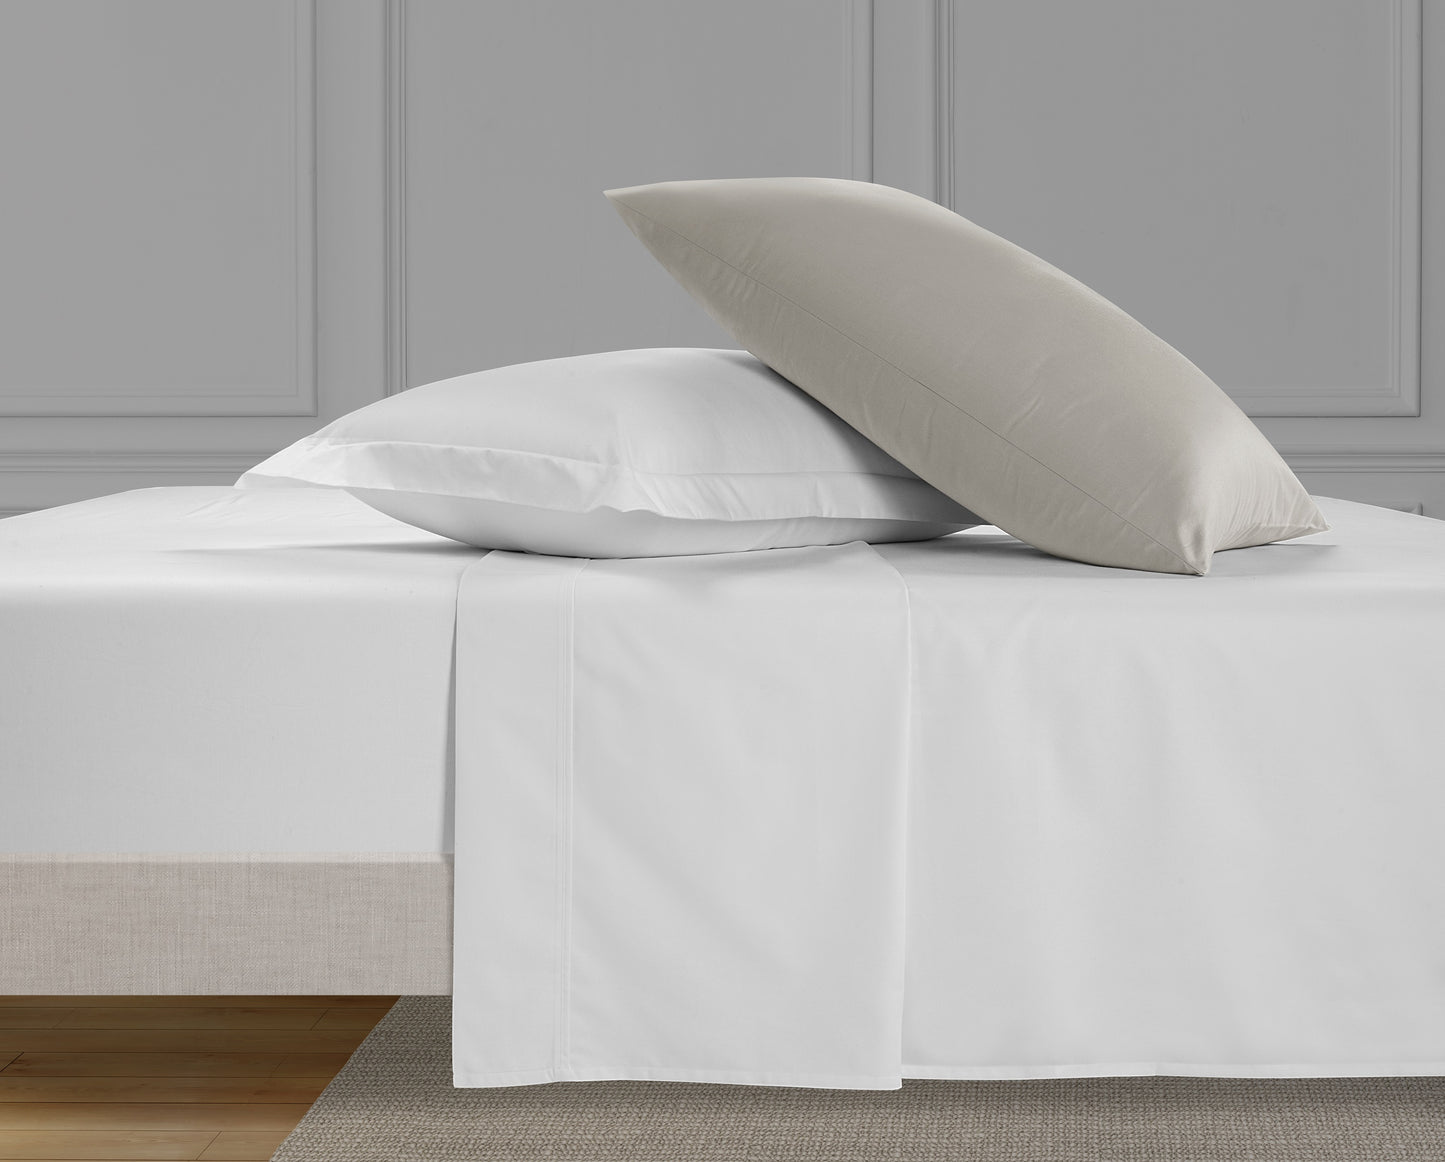 300 Thread Count Peaceful Empress Sheet Set - Oyster Mushroom with White Bedding